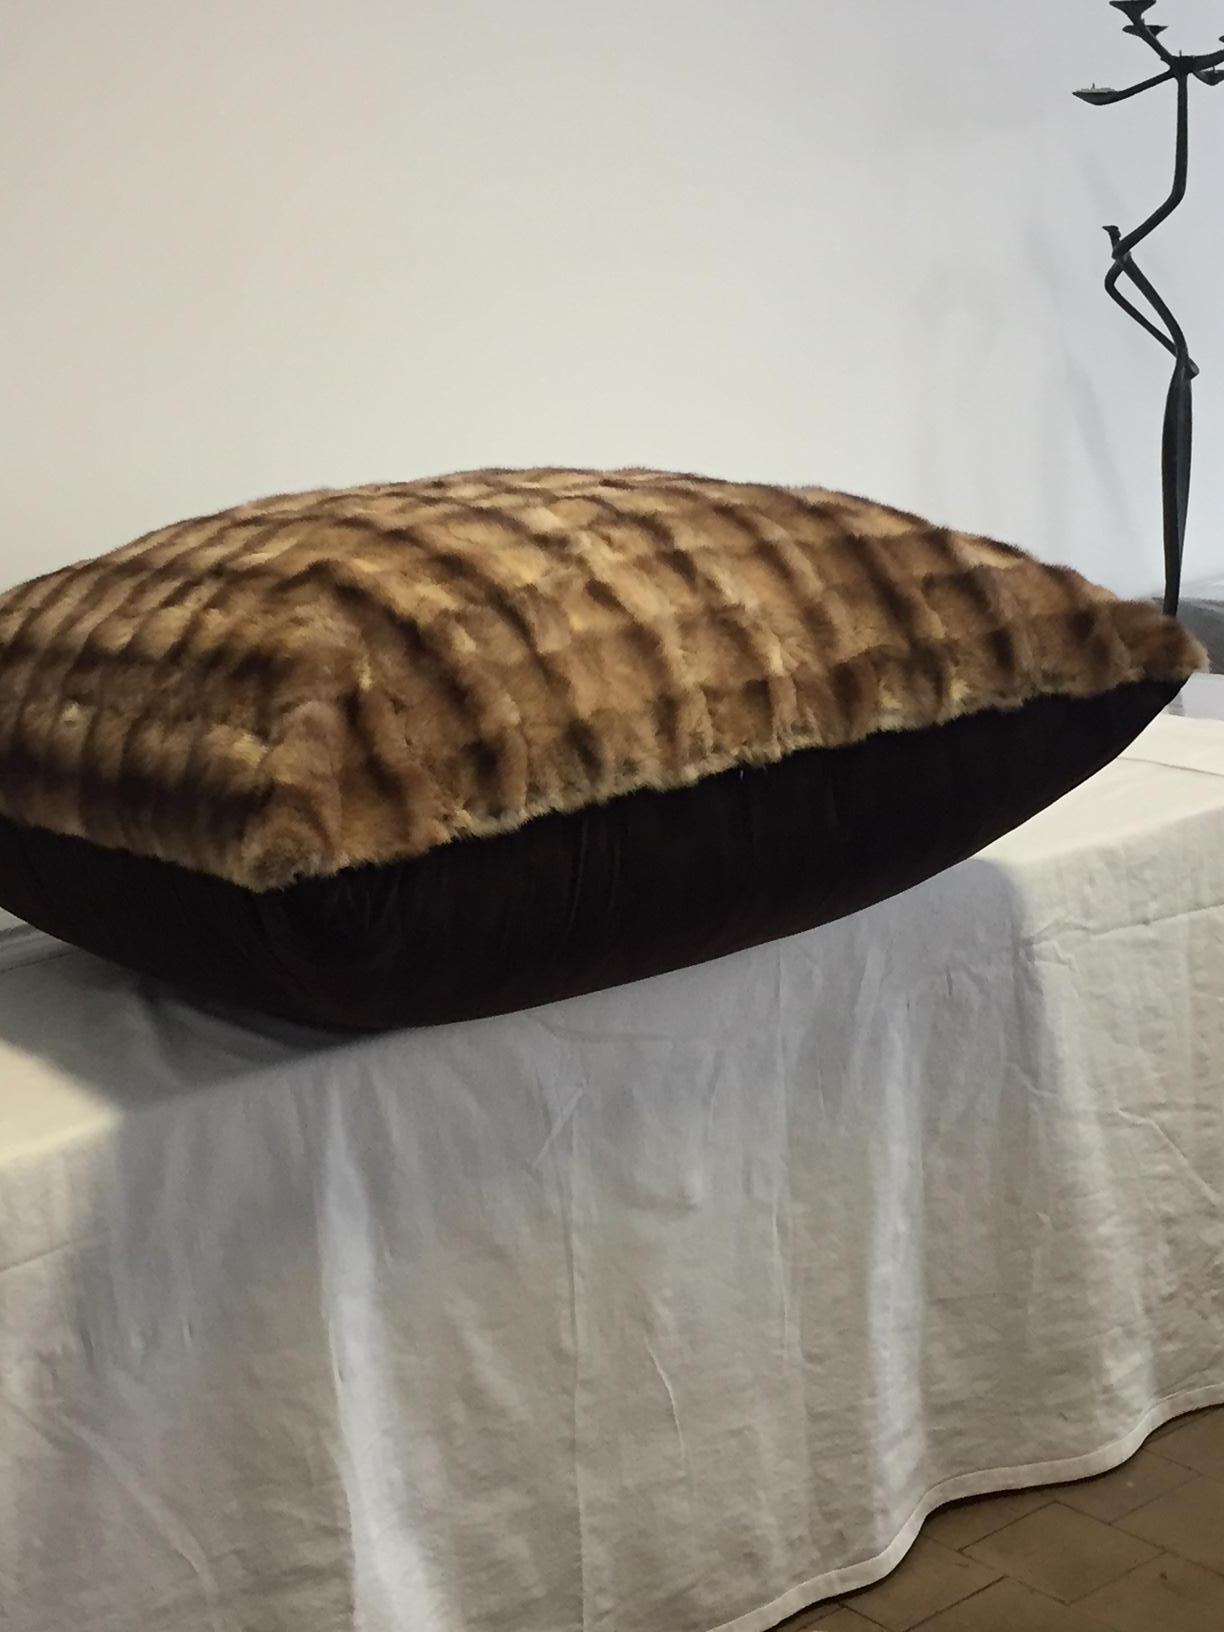 Floor cushion Barguzin sable, square shaped. Size: 107 x 107cm, 50cm seat height, inner cushion is filled with feather and foam for a perfect seat comfort, the sable is done in a patch work, the cushion cover has at the top the fur and on the back